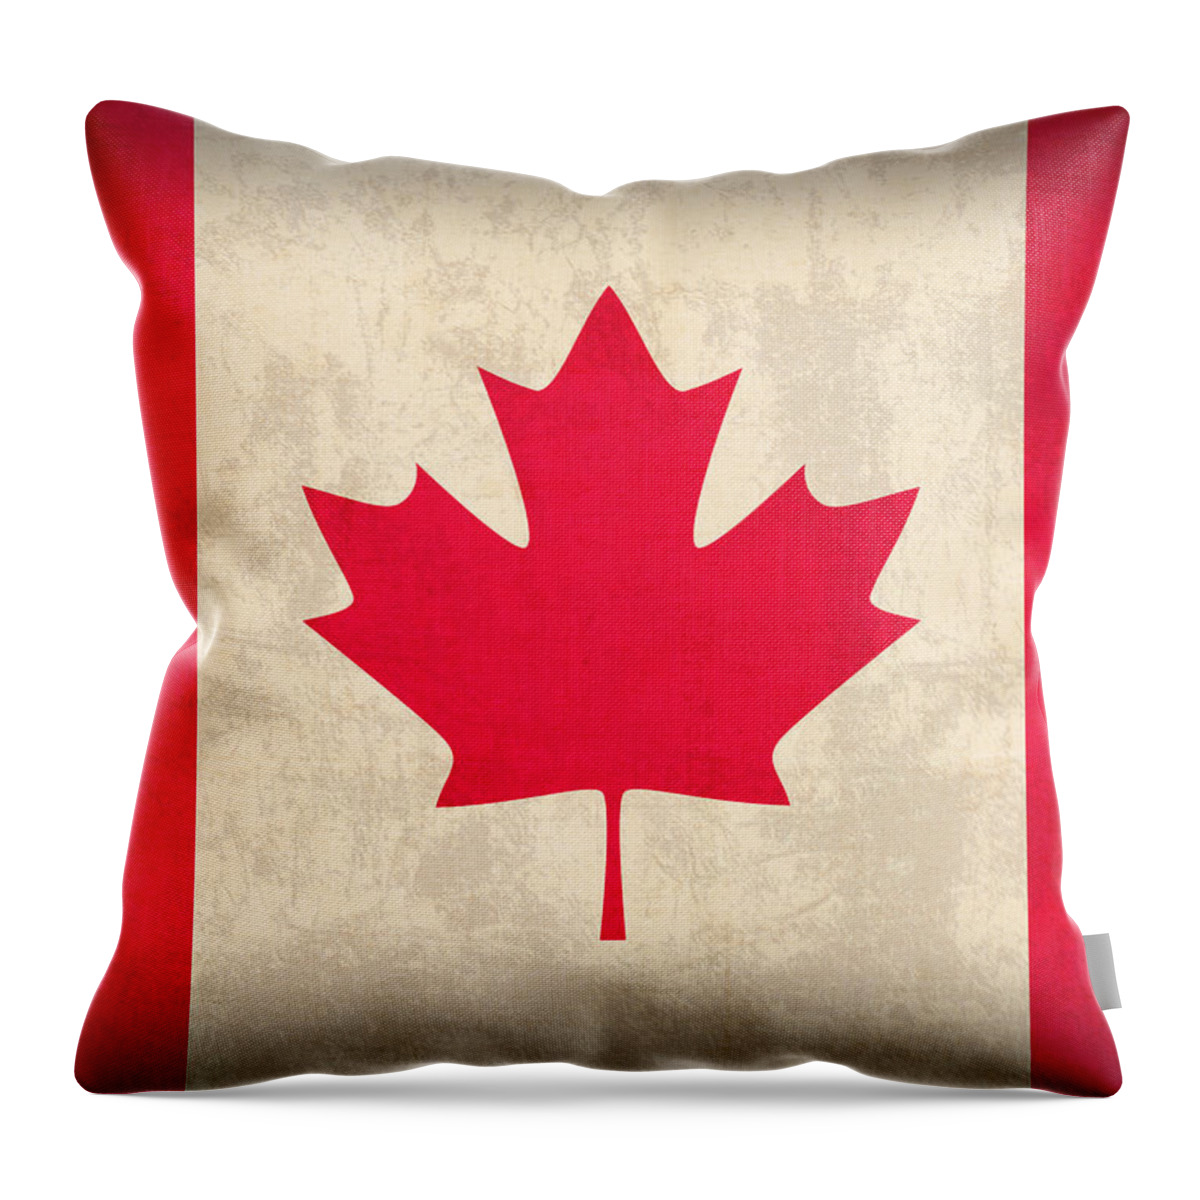 Canada Throw Pillow featuring the mixed media Canada Flag Vintage Distressed Finish by Design Turnpike